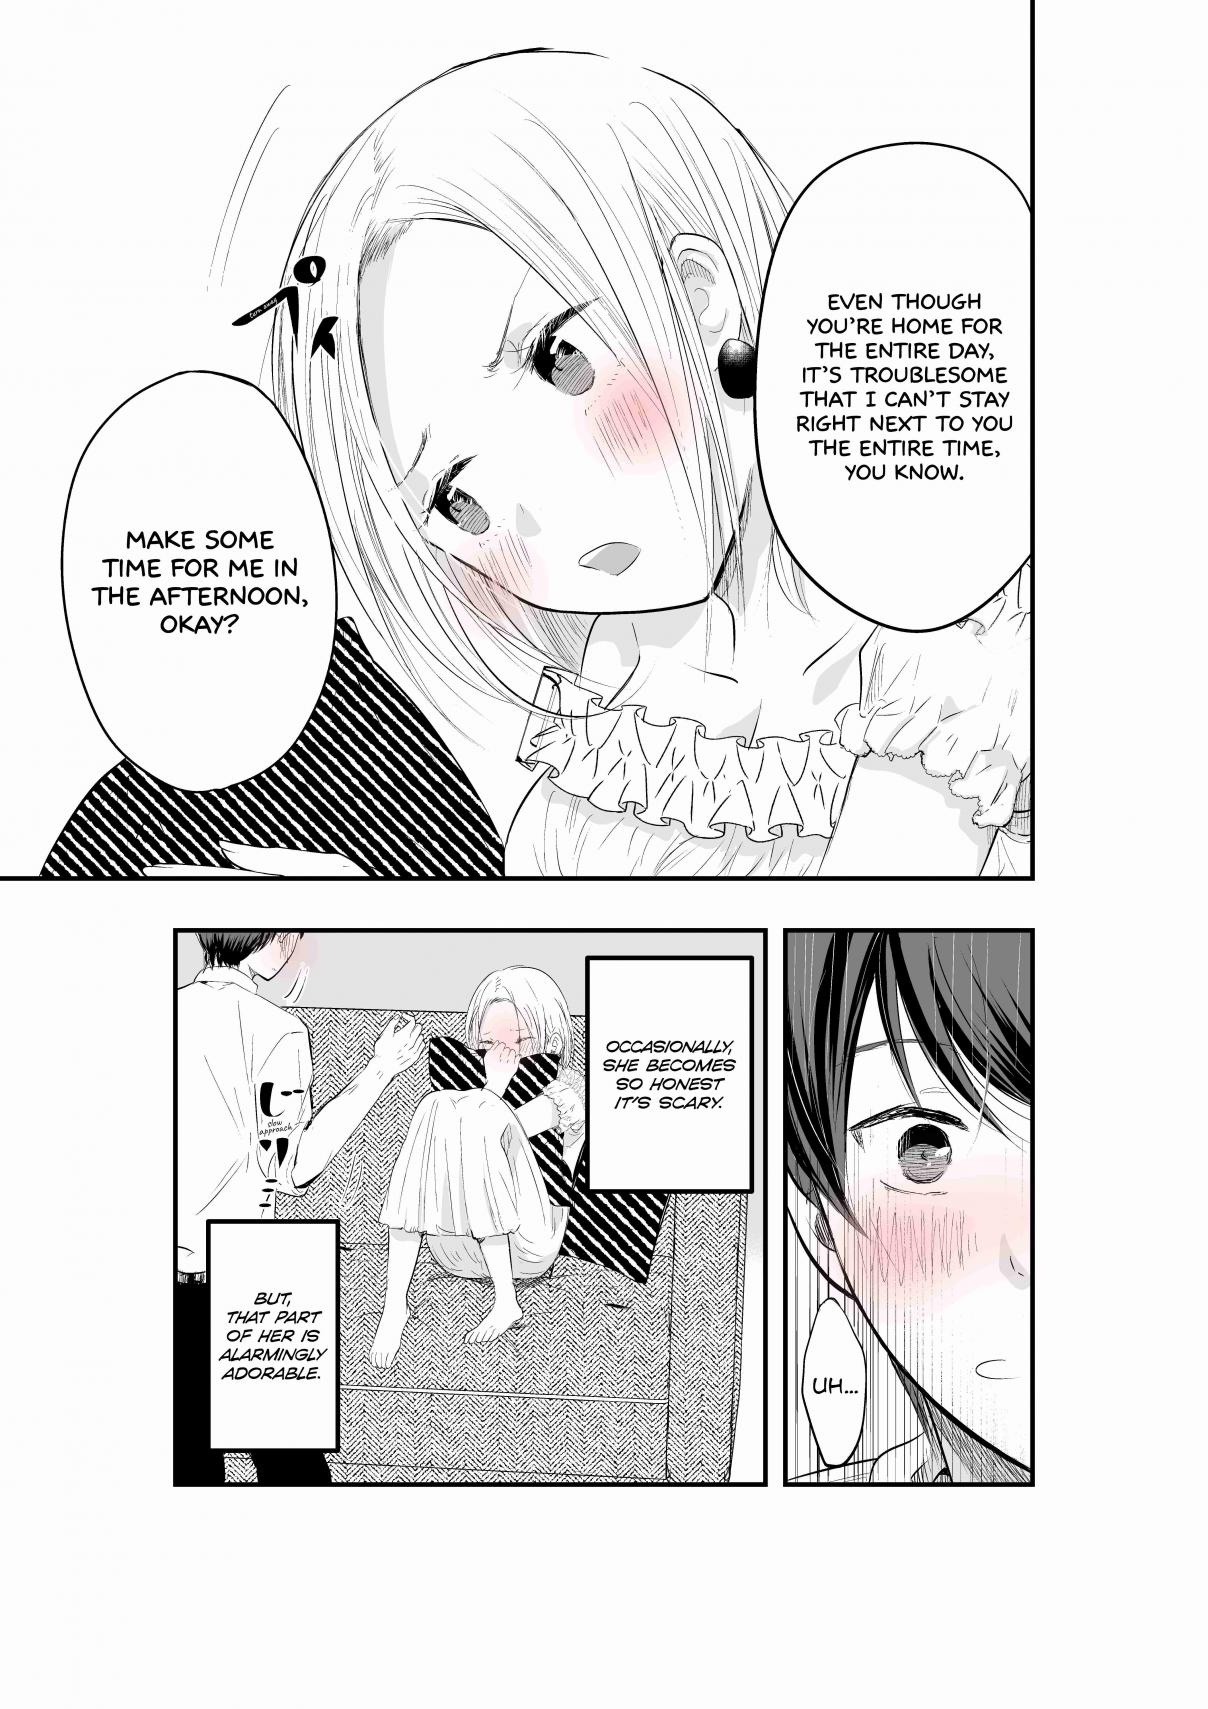 My Wife Is a Little Scary Ch. 7